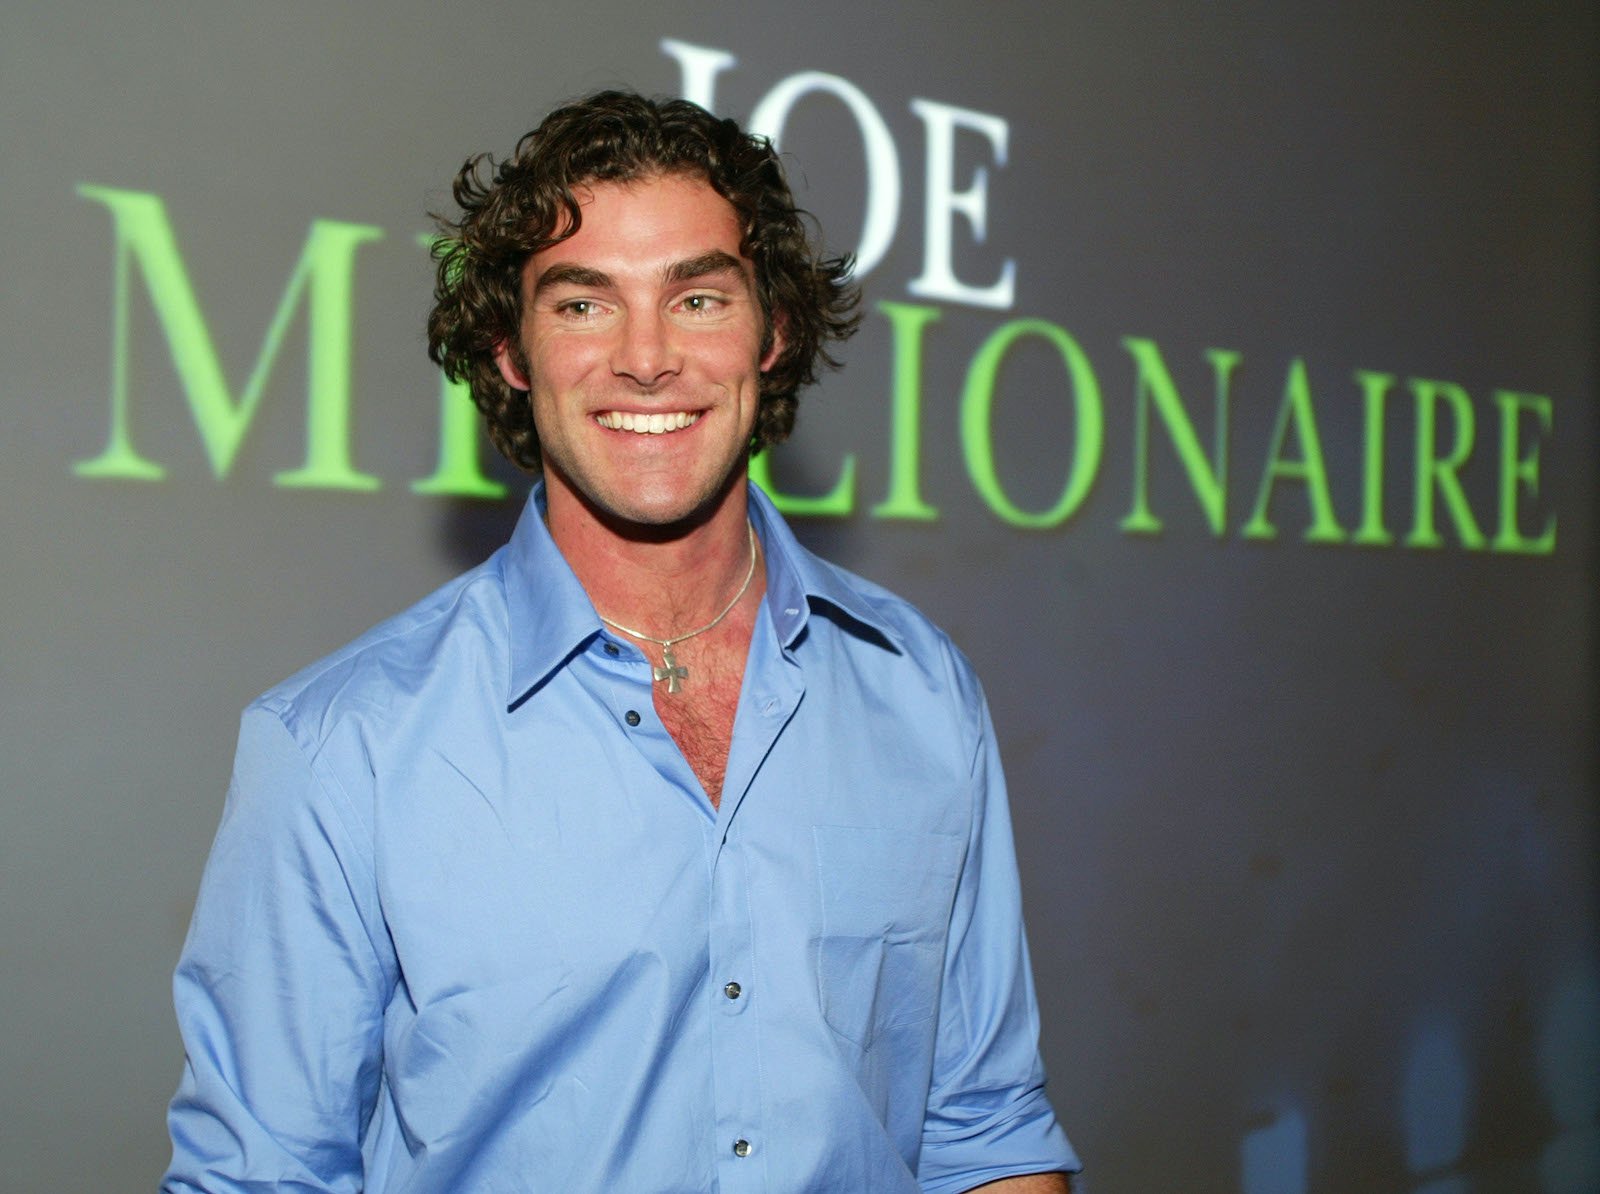 'Joe Millionaire' star Evan Marriott smiles wearing a blue shirt while standing in front of a backdrop with the show's title.